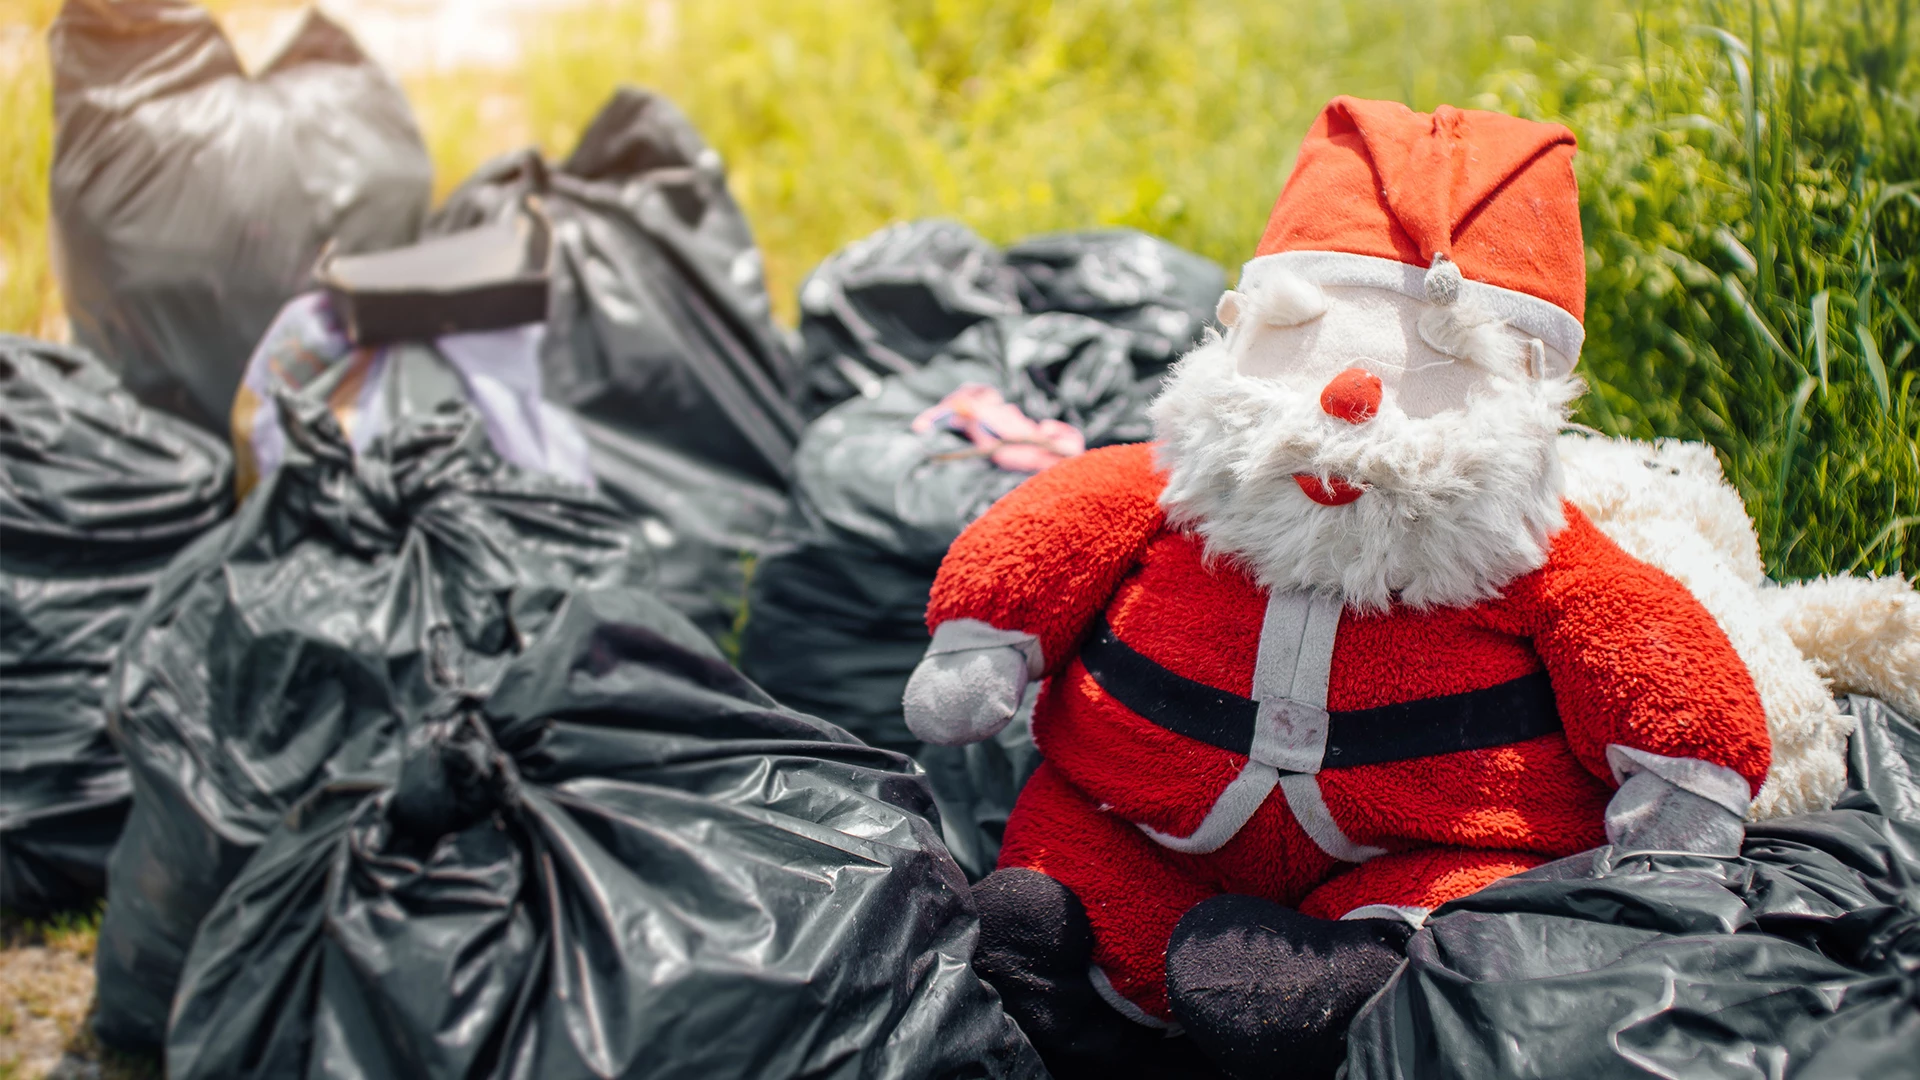 How best to cut down on holiday waste this thanksgiving: